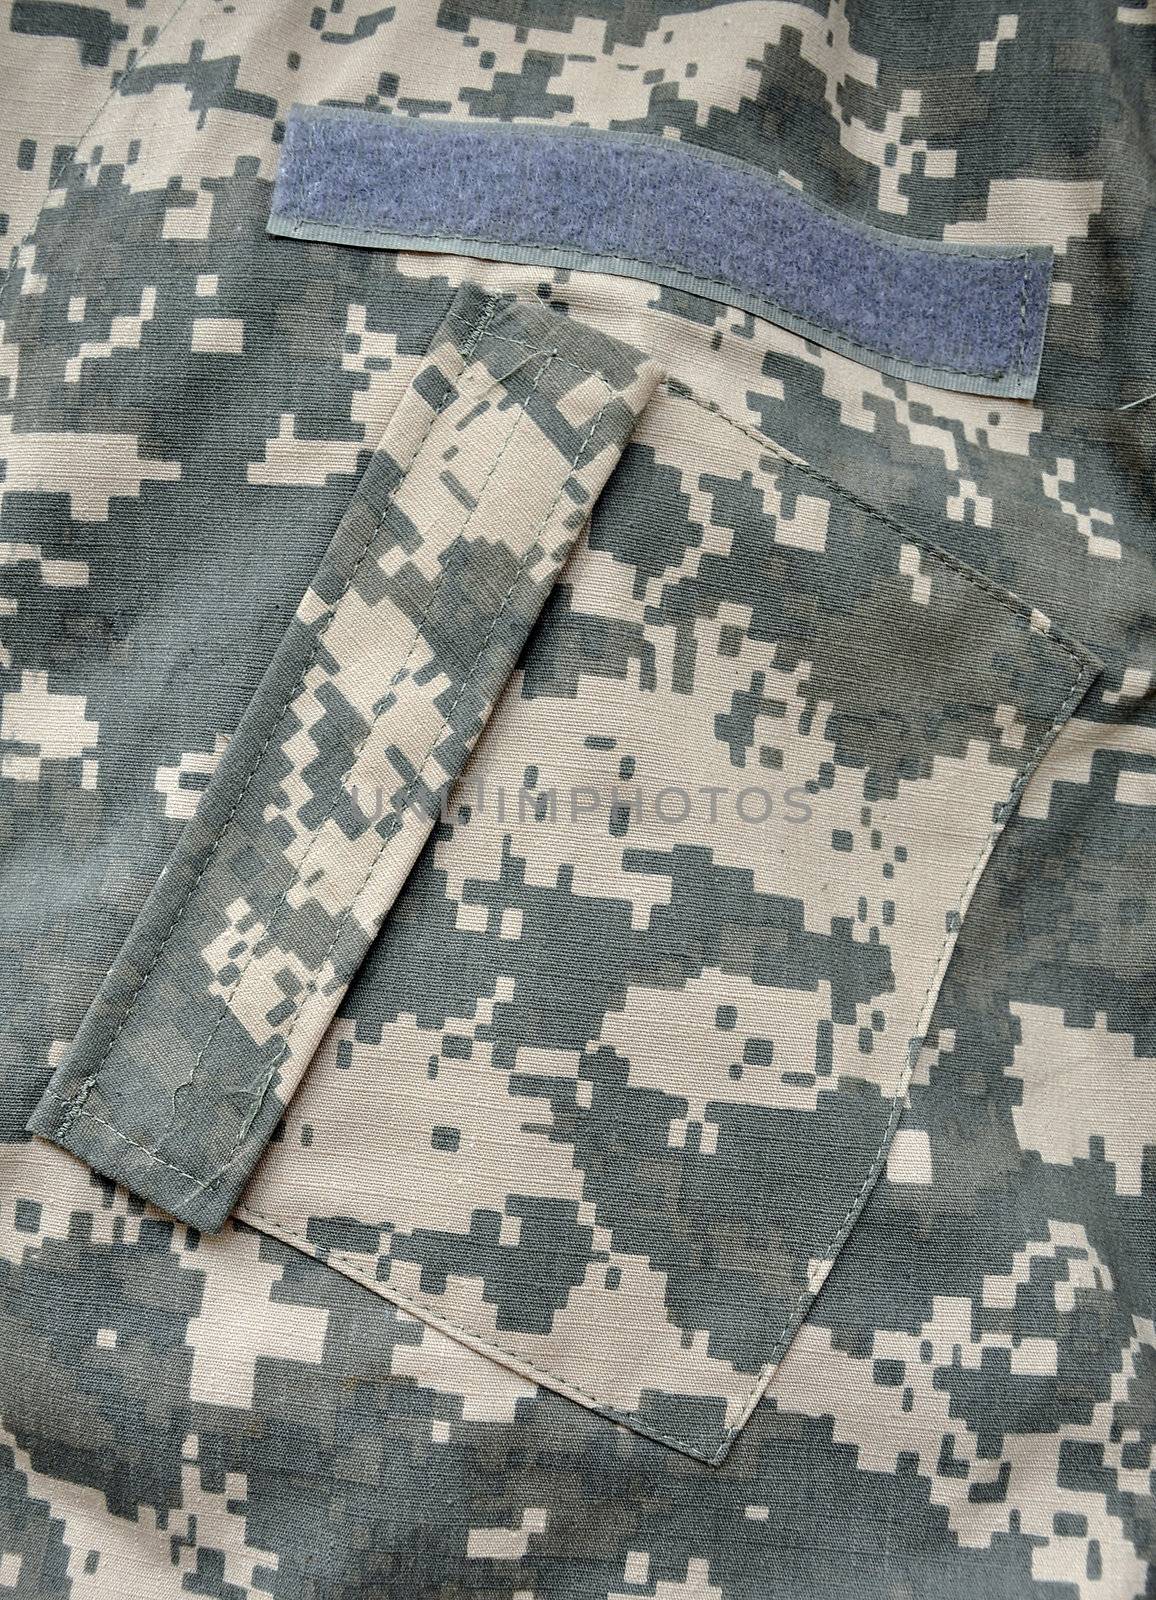 The Universal Camouflage Pattern (UCP), also referred to as ACUPAT (Army Combat Uniform PATtern) or Digital Camouflage ("digicam") is the military camouflage pattern currently in use in the United States Army's Army Combat Uniform.